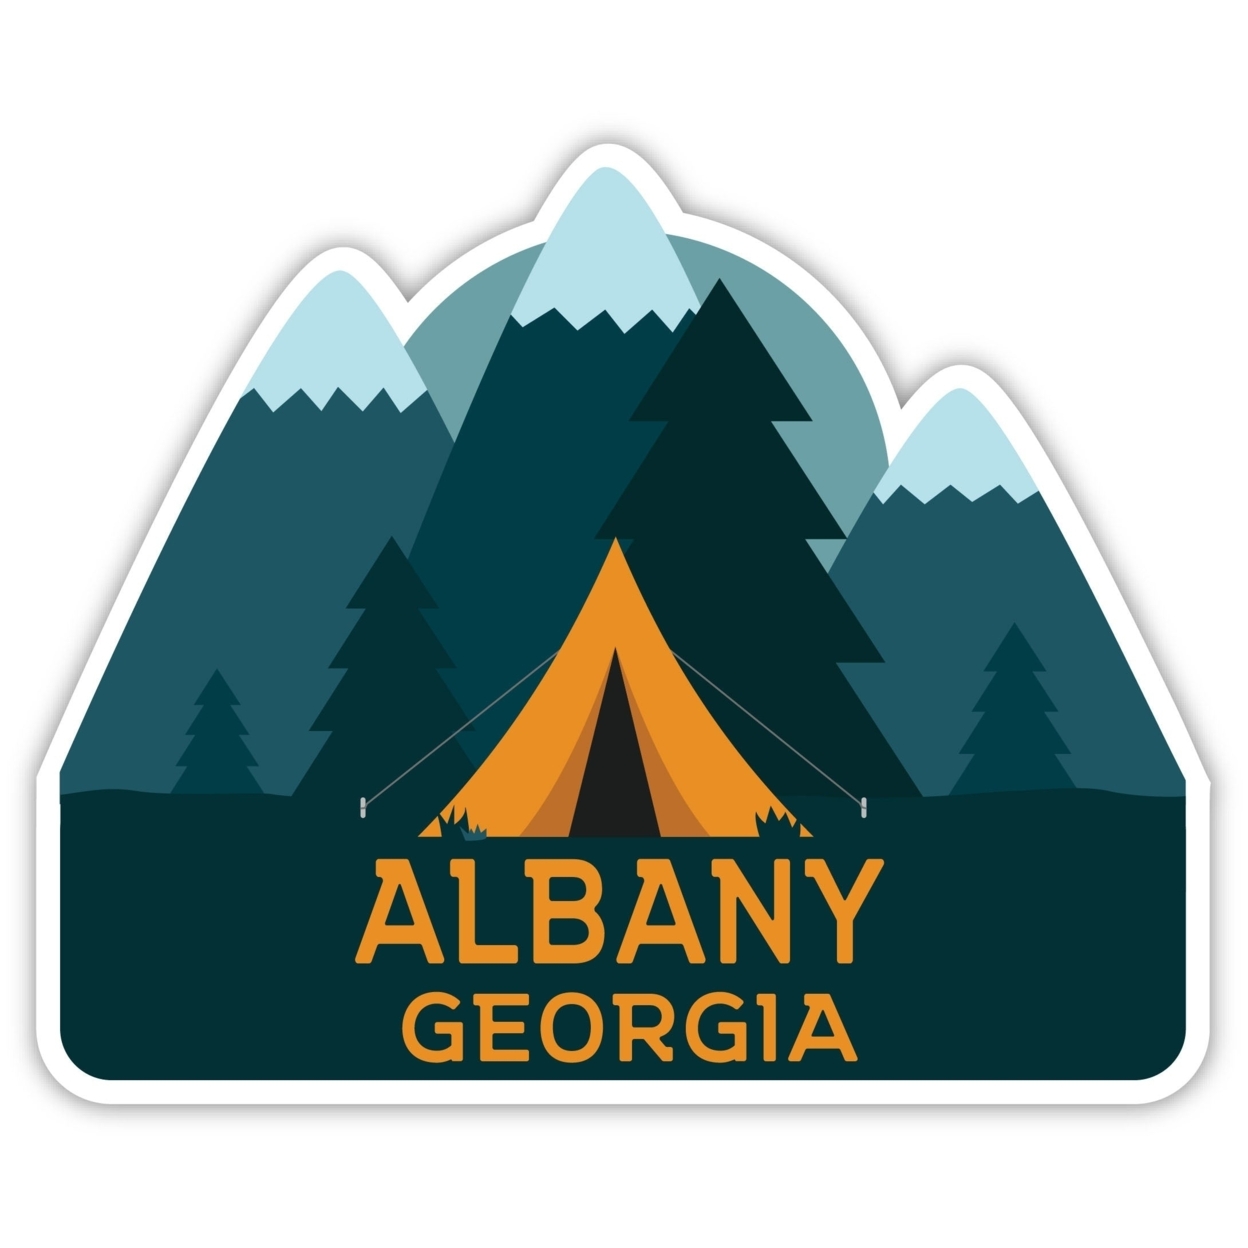 Albany Georgia Souvenir Decorative Stickers (Choose Theme And Size) - 4-Pack, 8-Inch, Bear